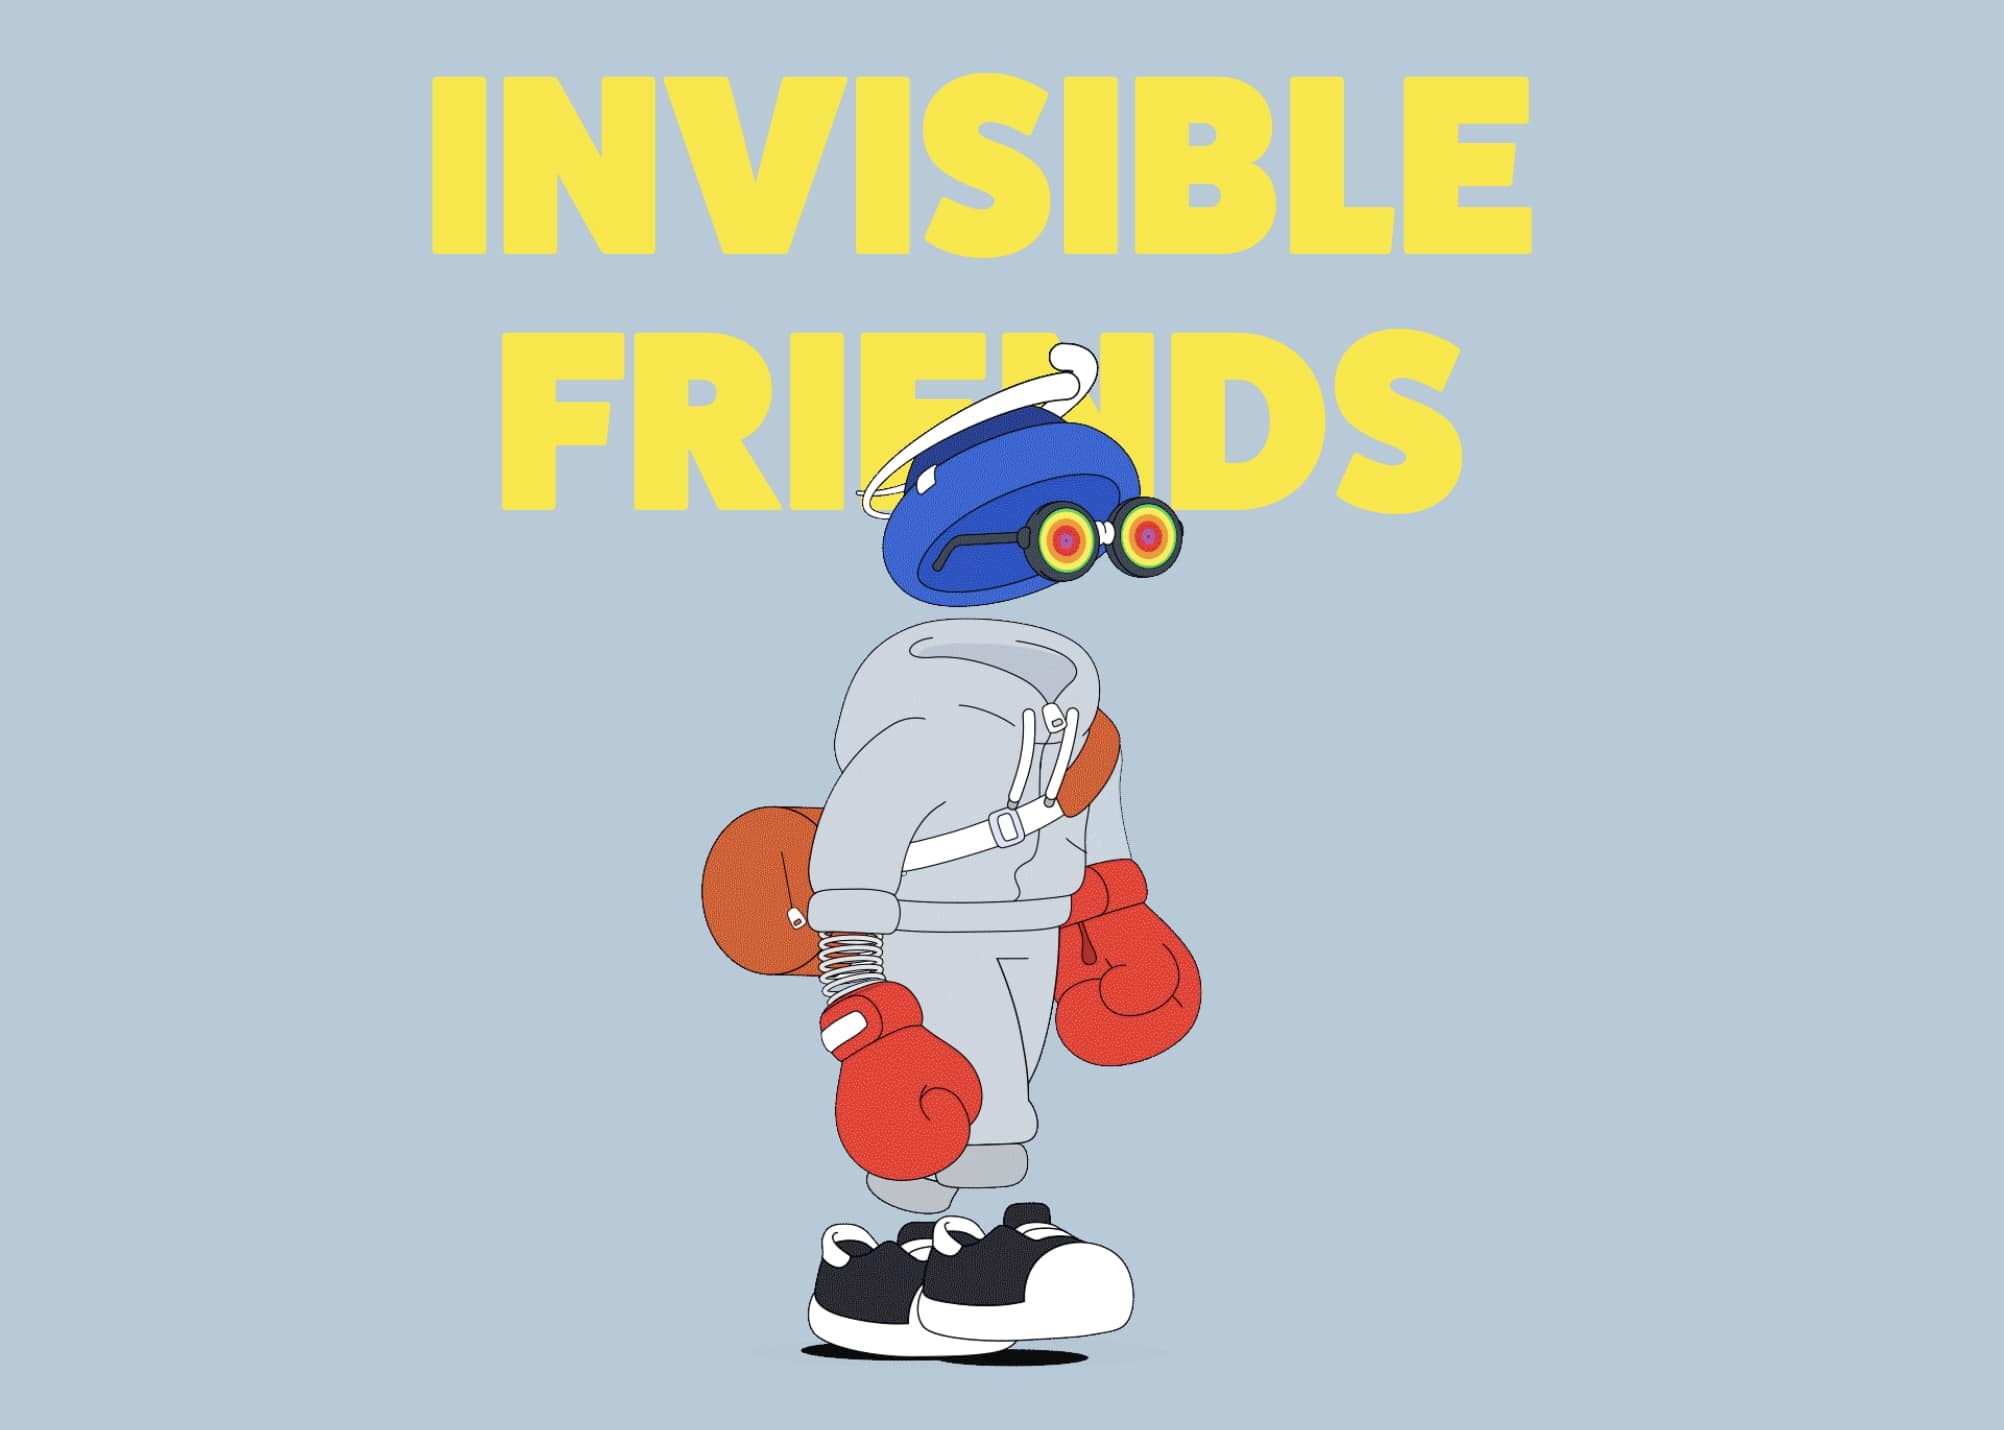 An NFT of the Invisible Friends NFT collection